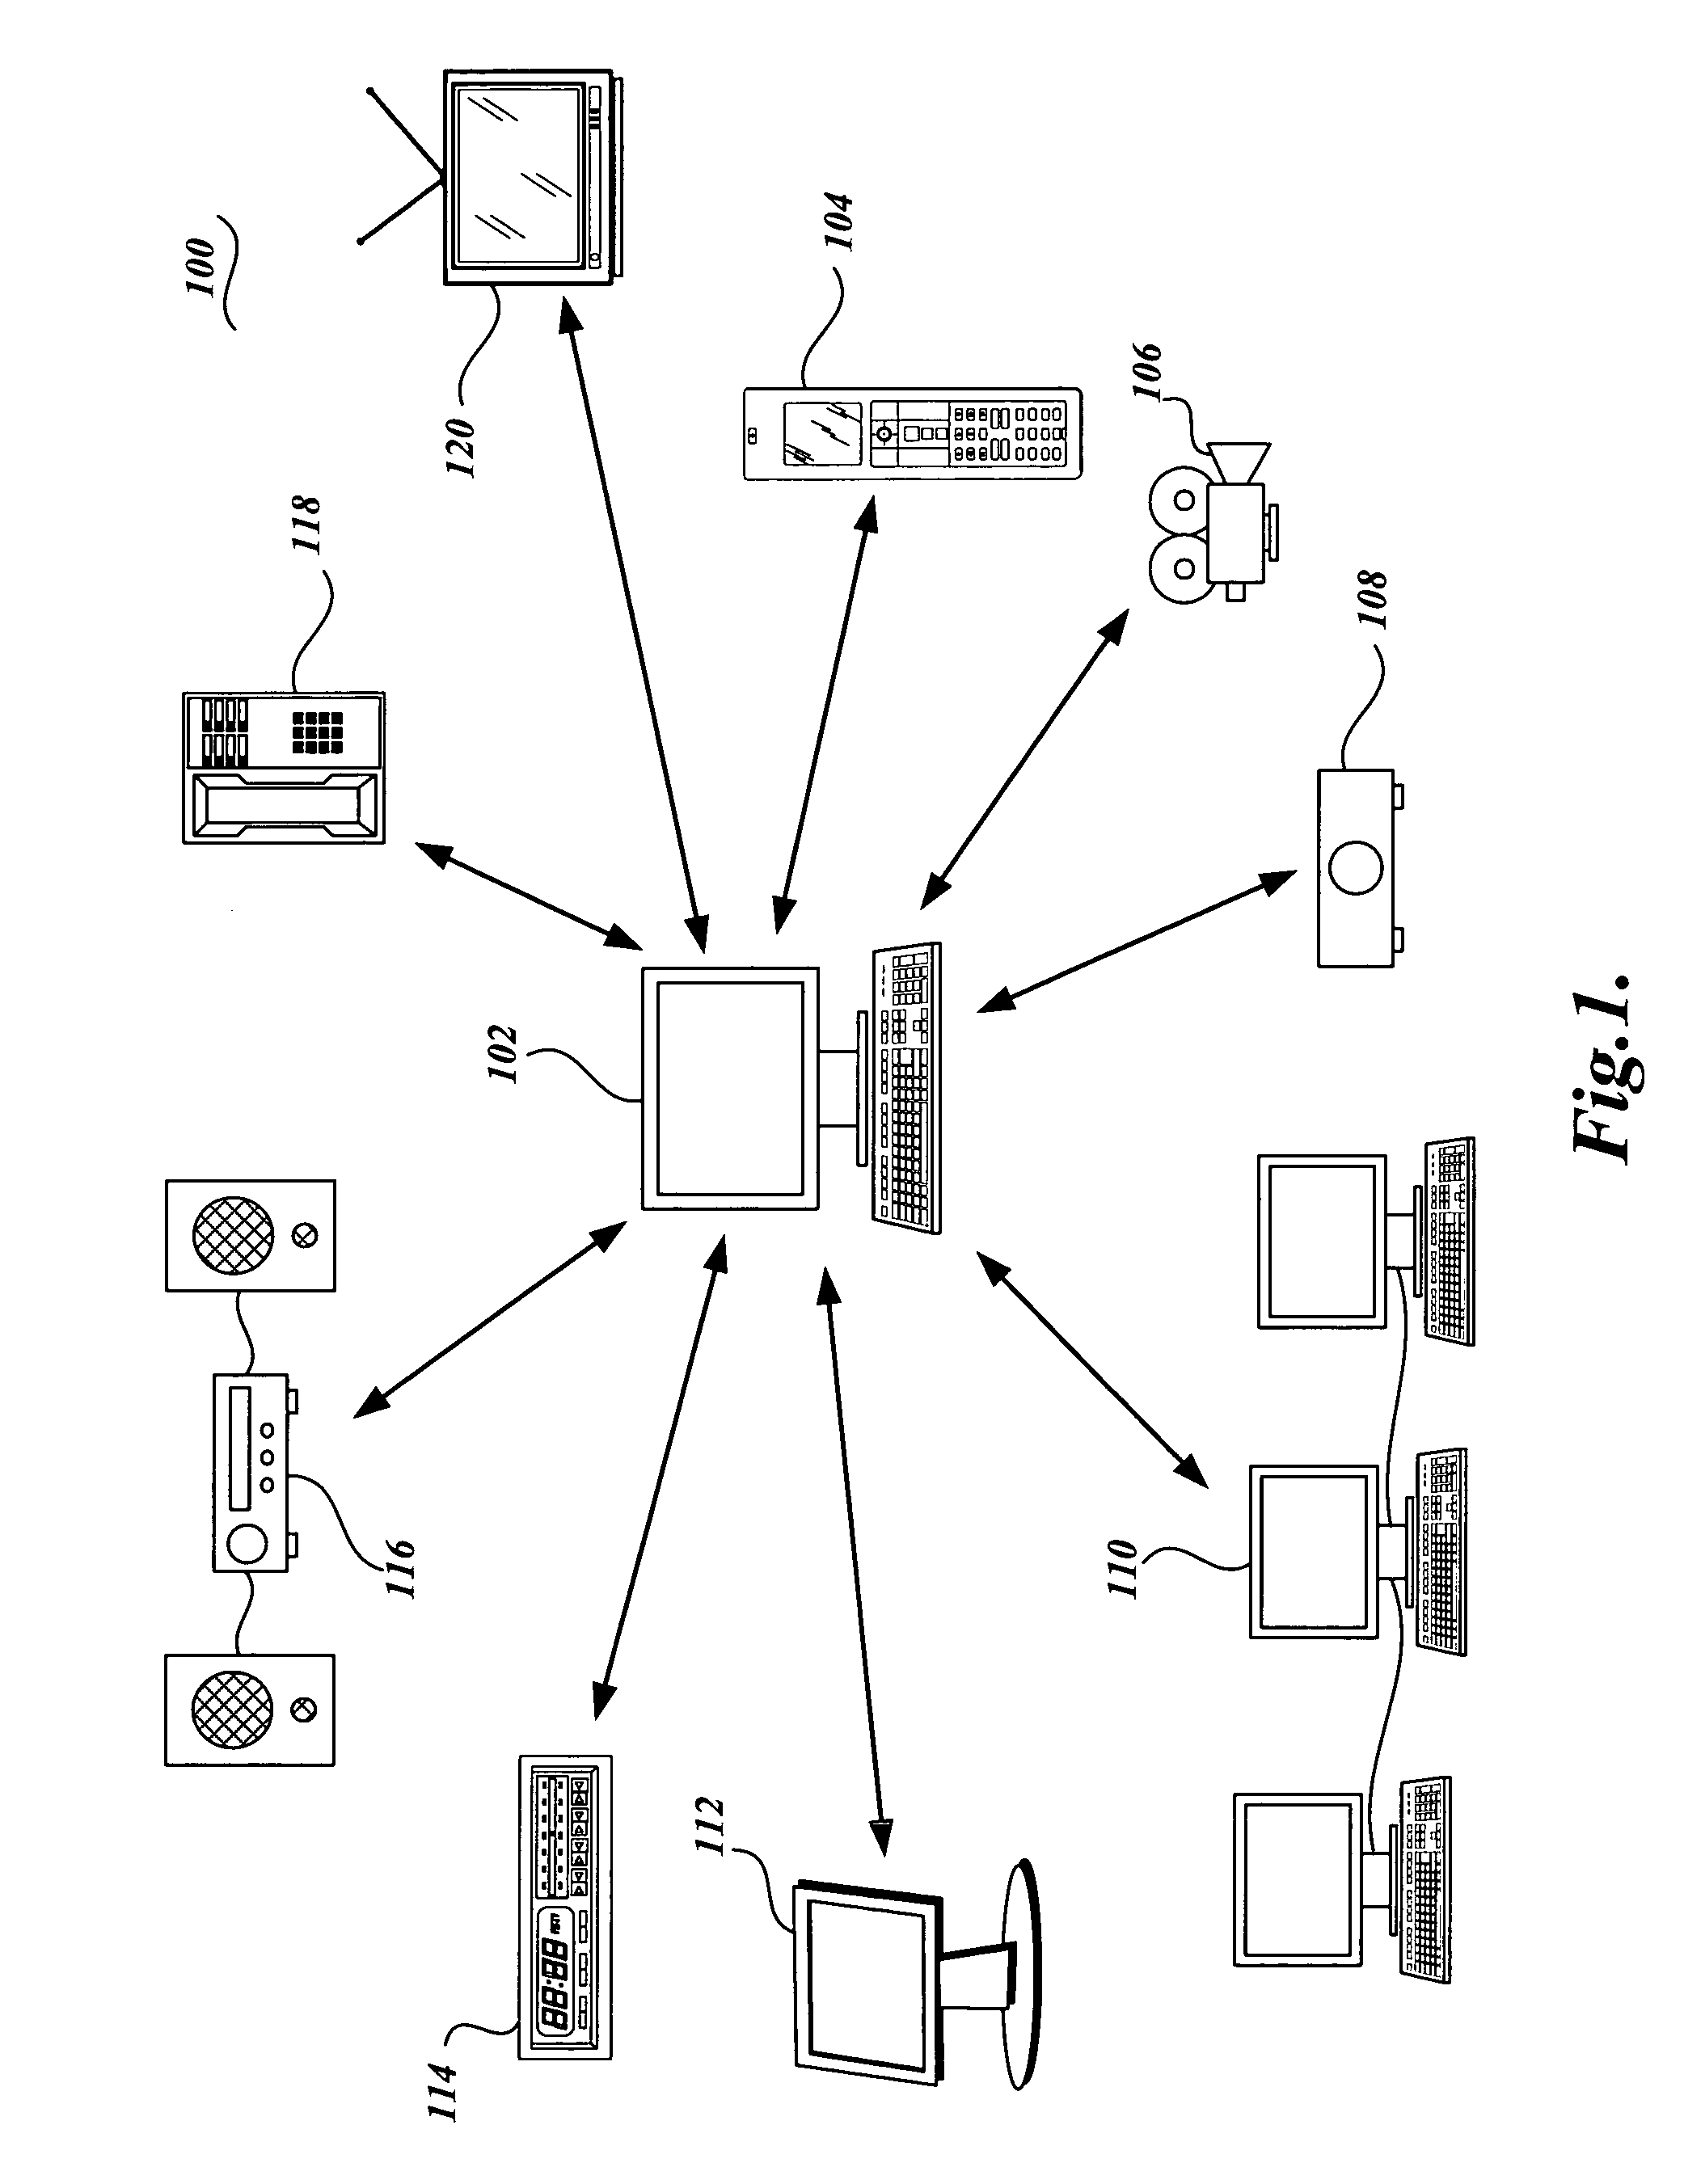 Methods and interactions for changing a remote control mode